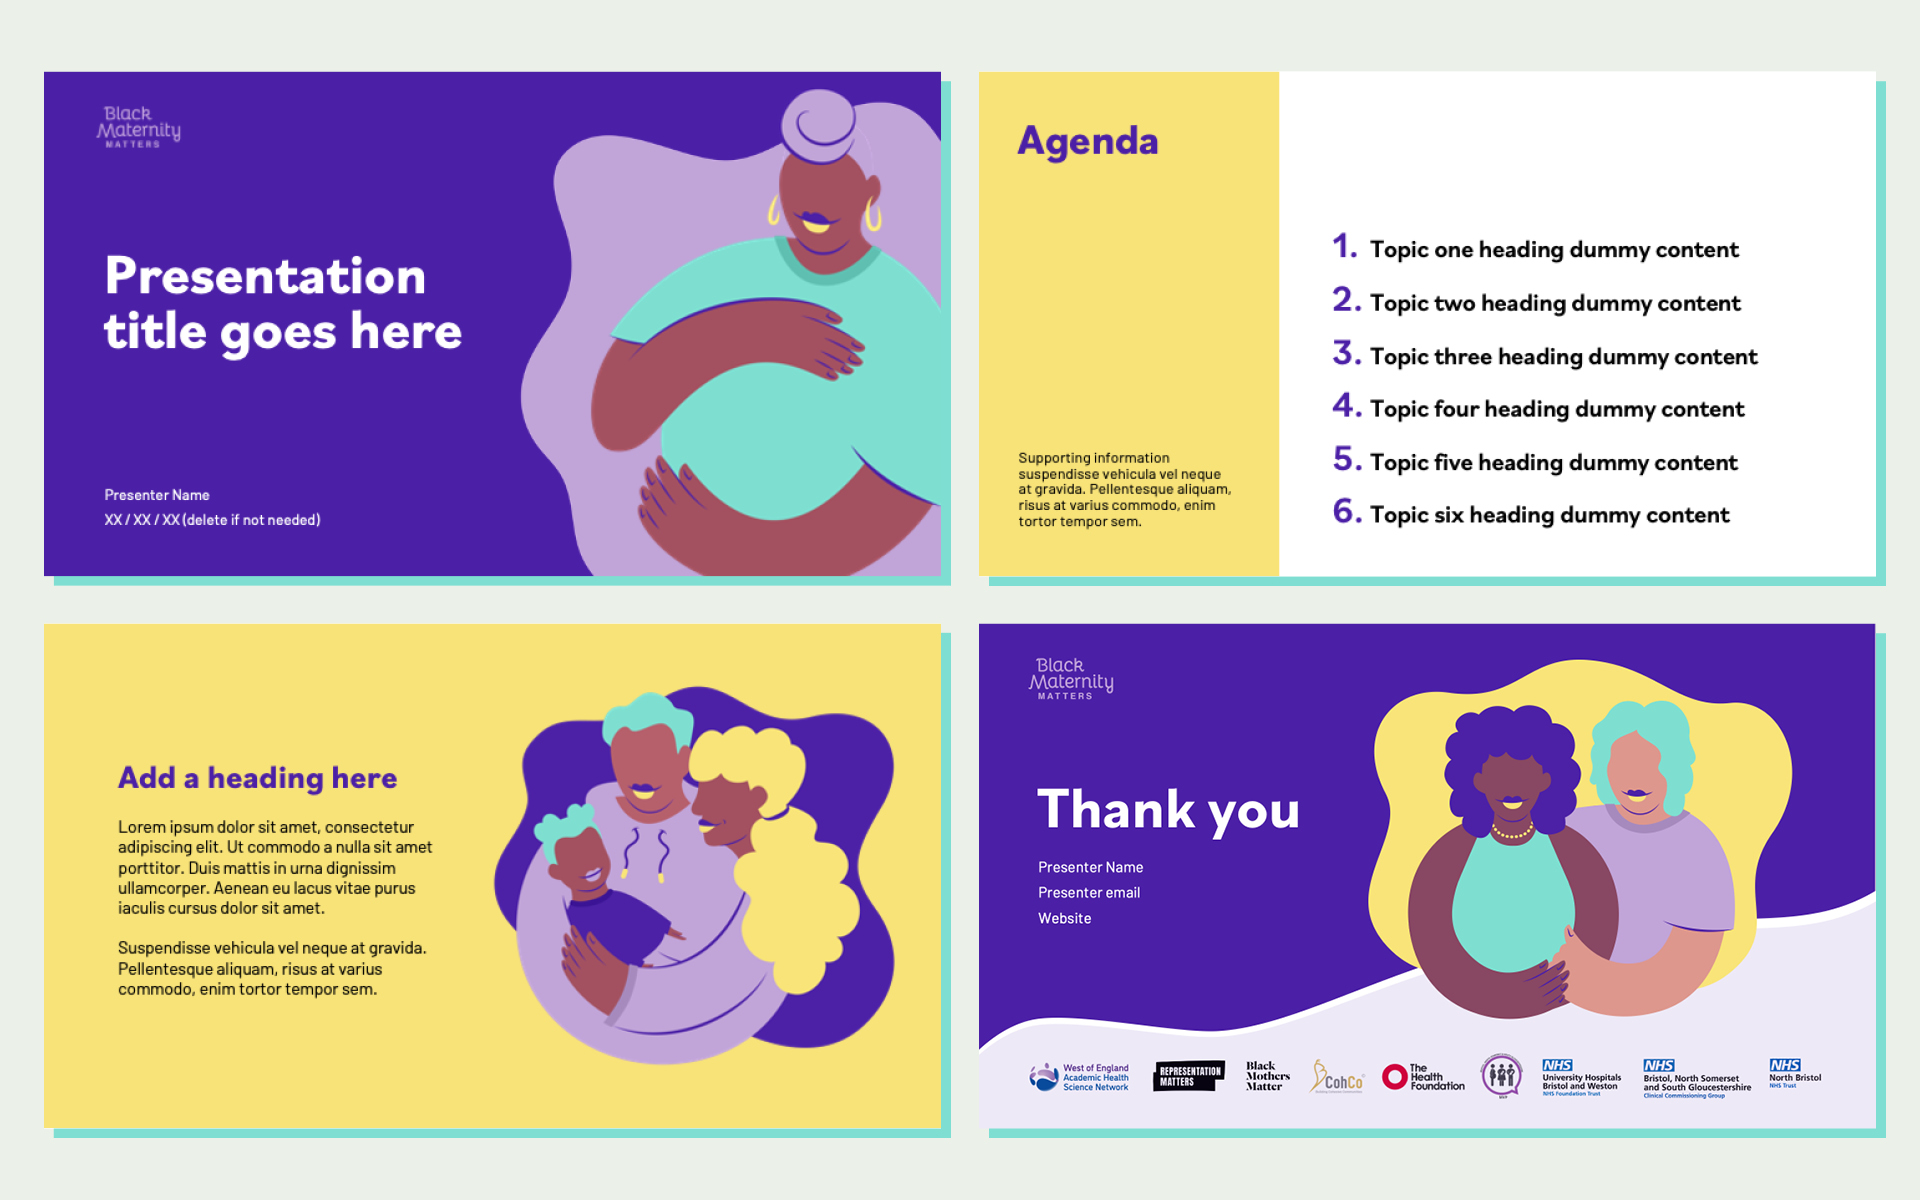 Design templates for Black Maternity Matters communications